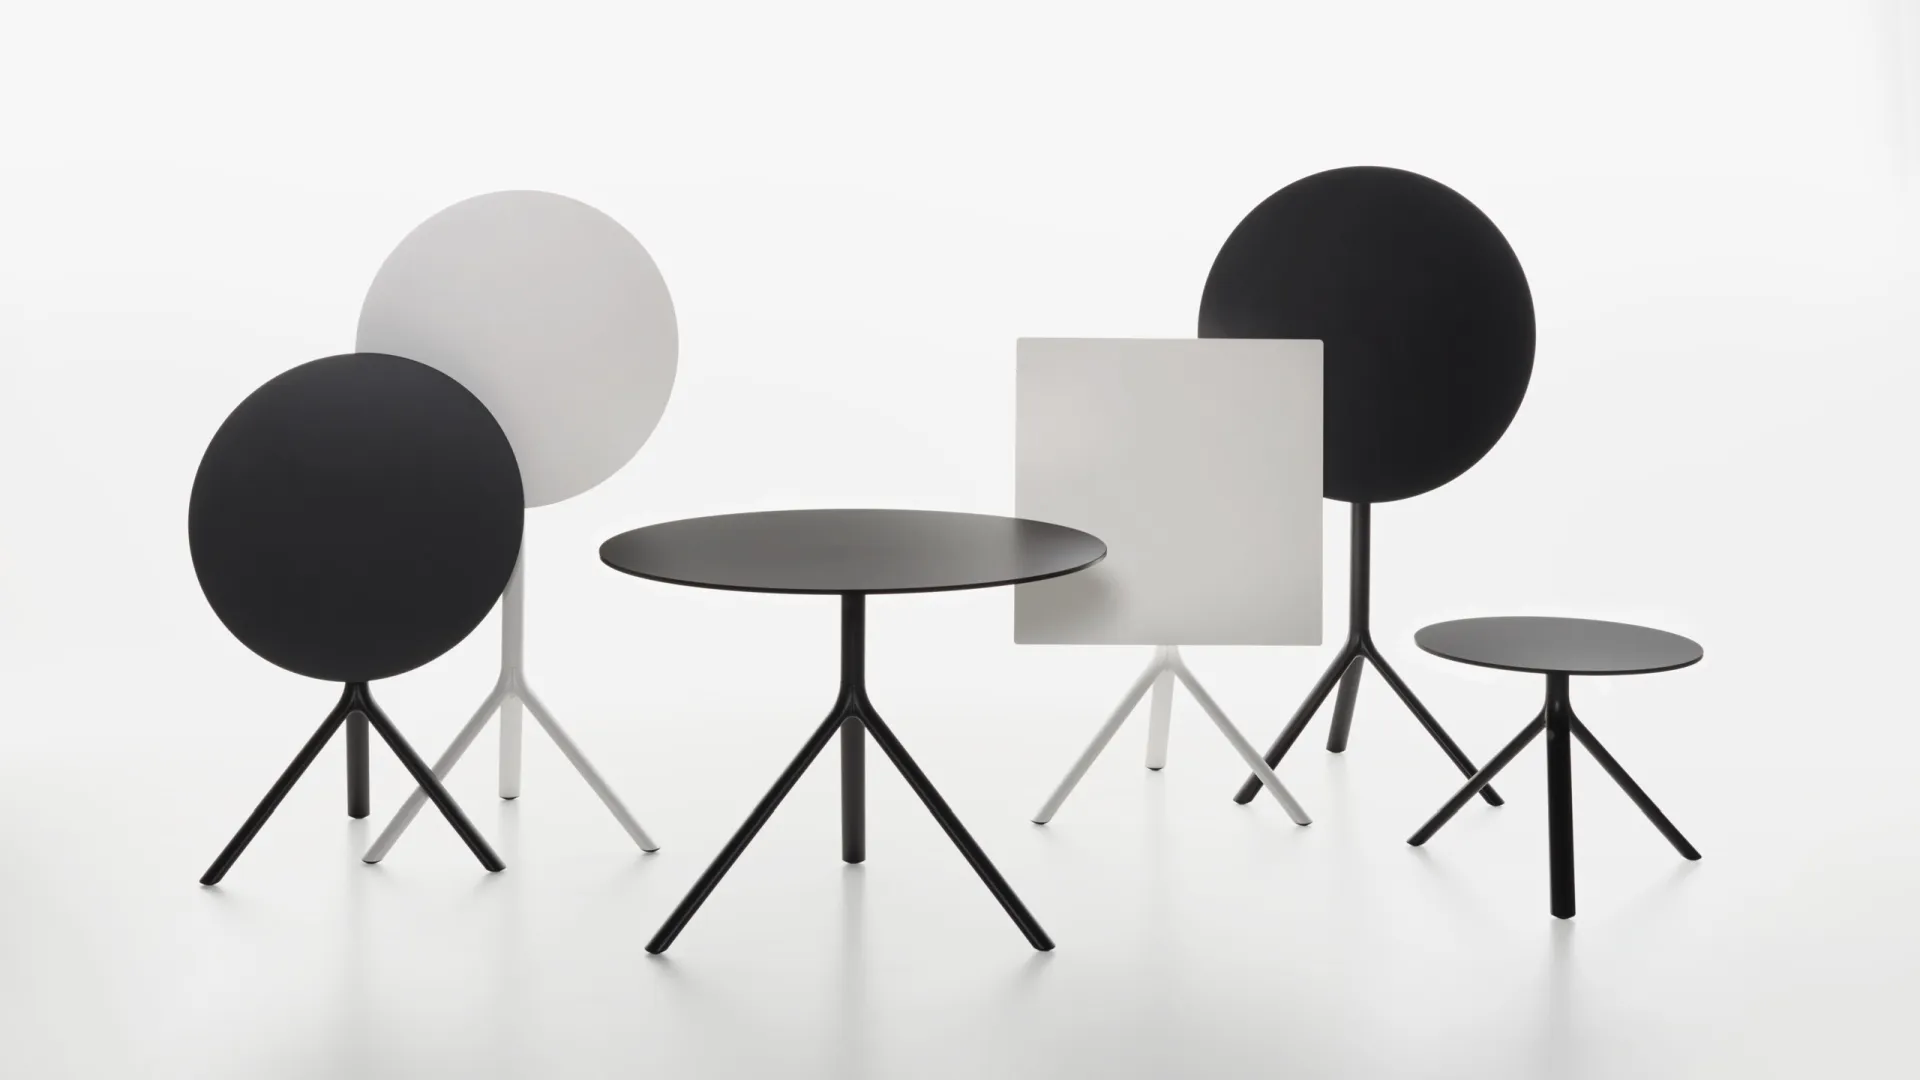 PLANK - MIURA table system designed by Konstantin Grcic